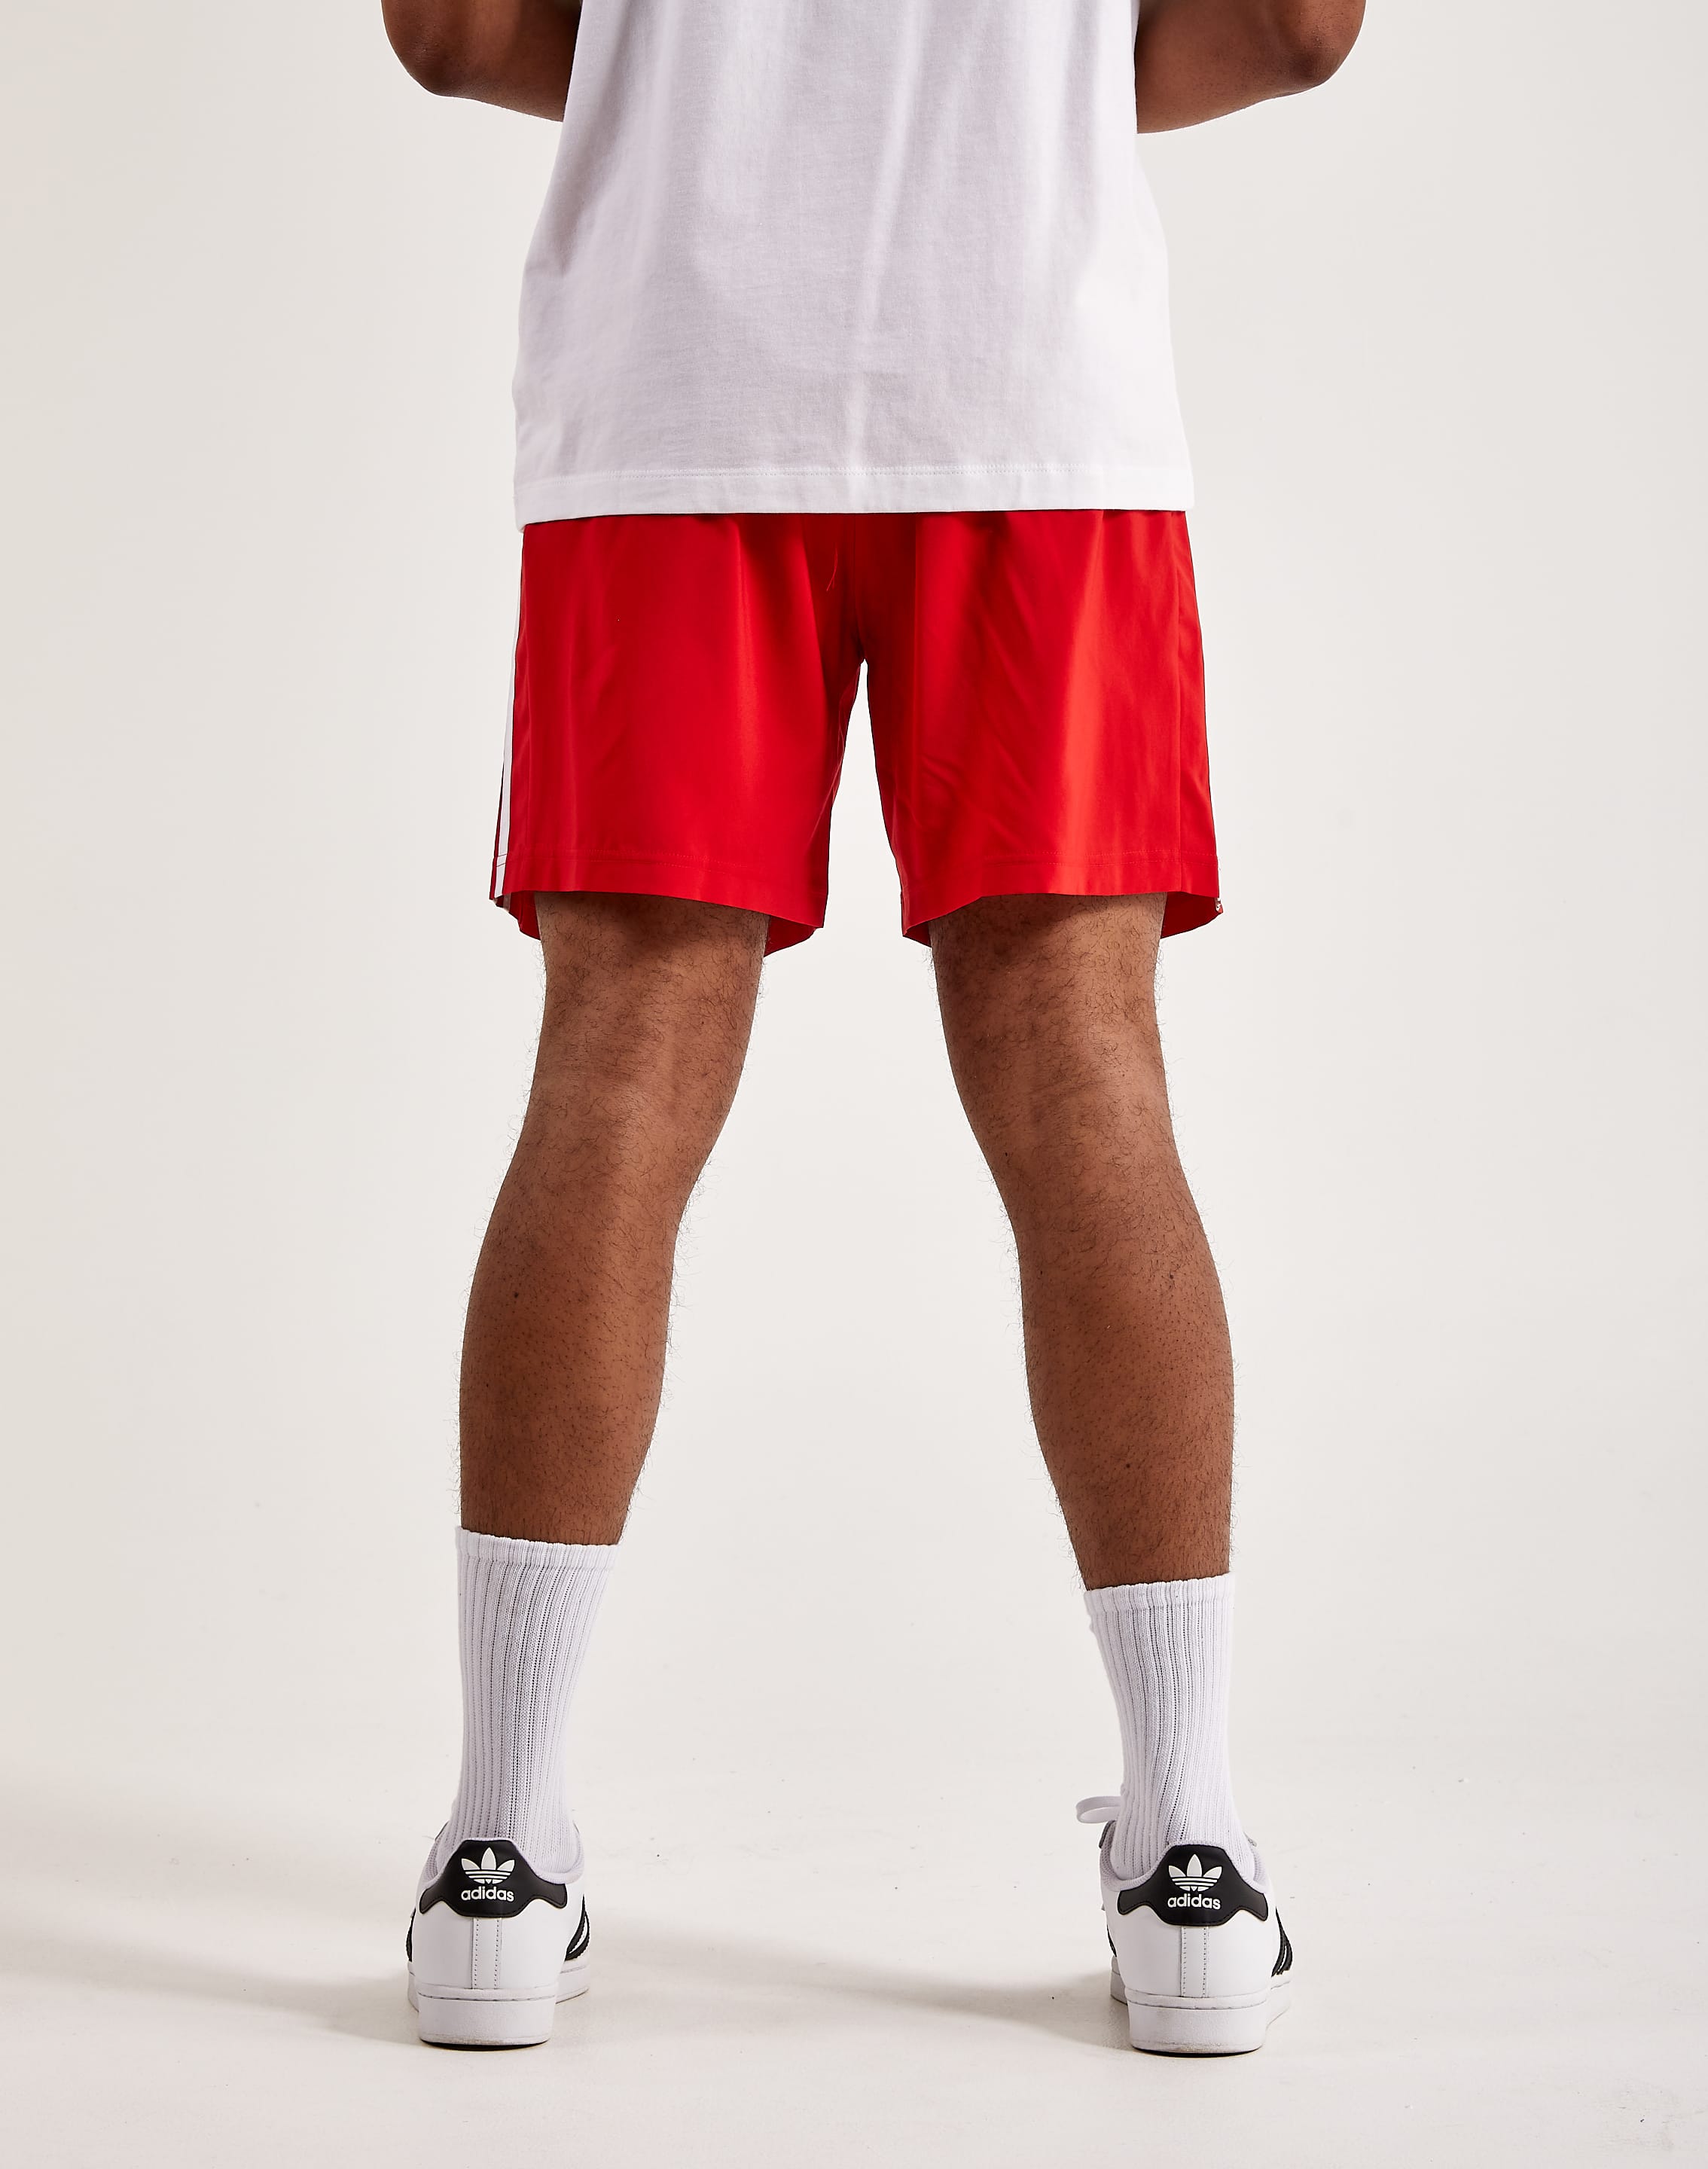 Chelsea Adidas – DTLR Shorts 3-Stripes